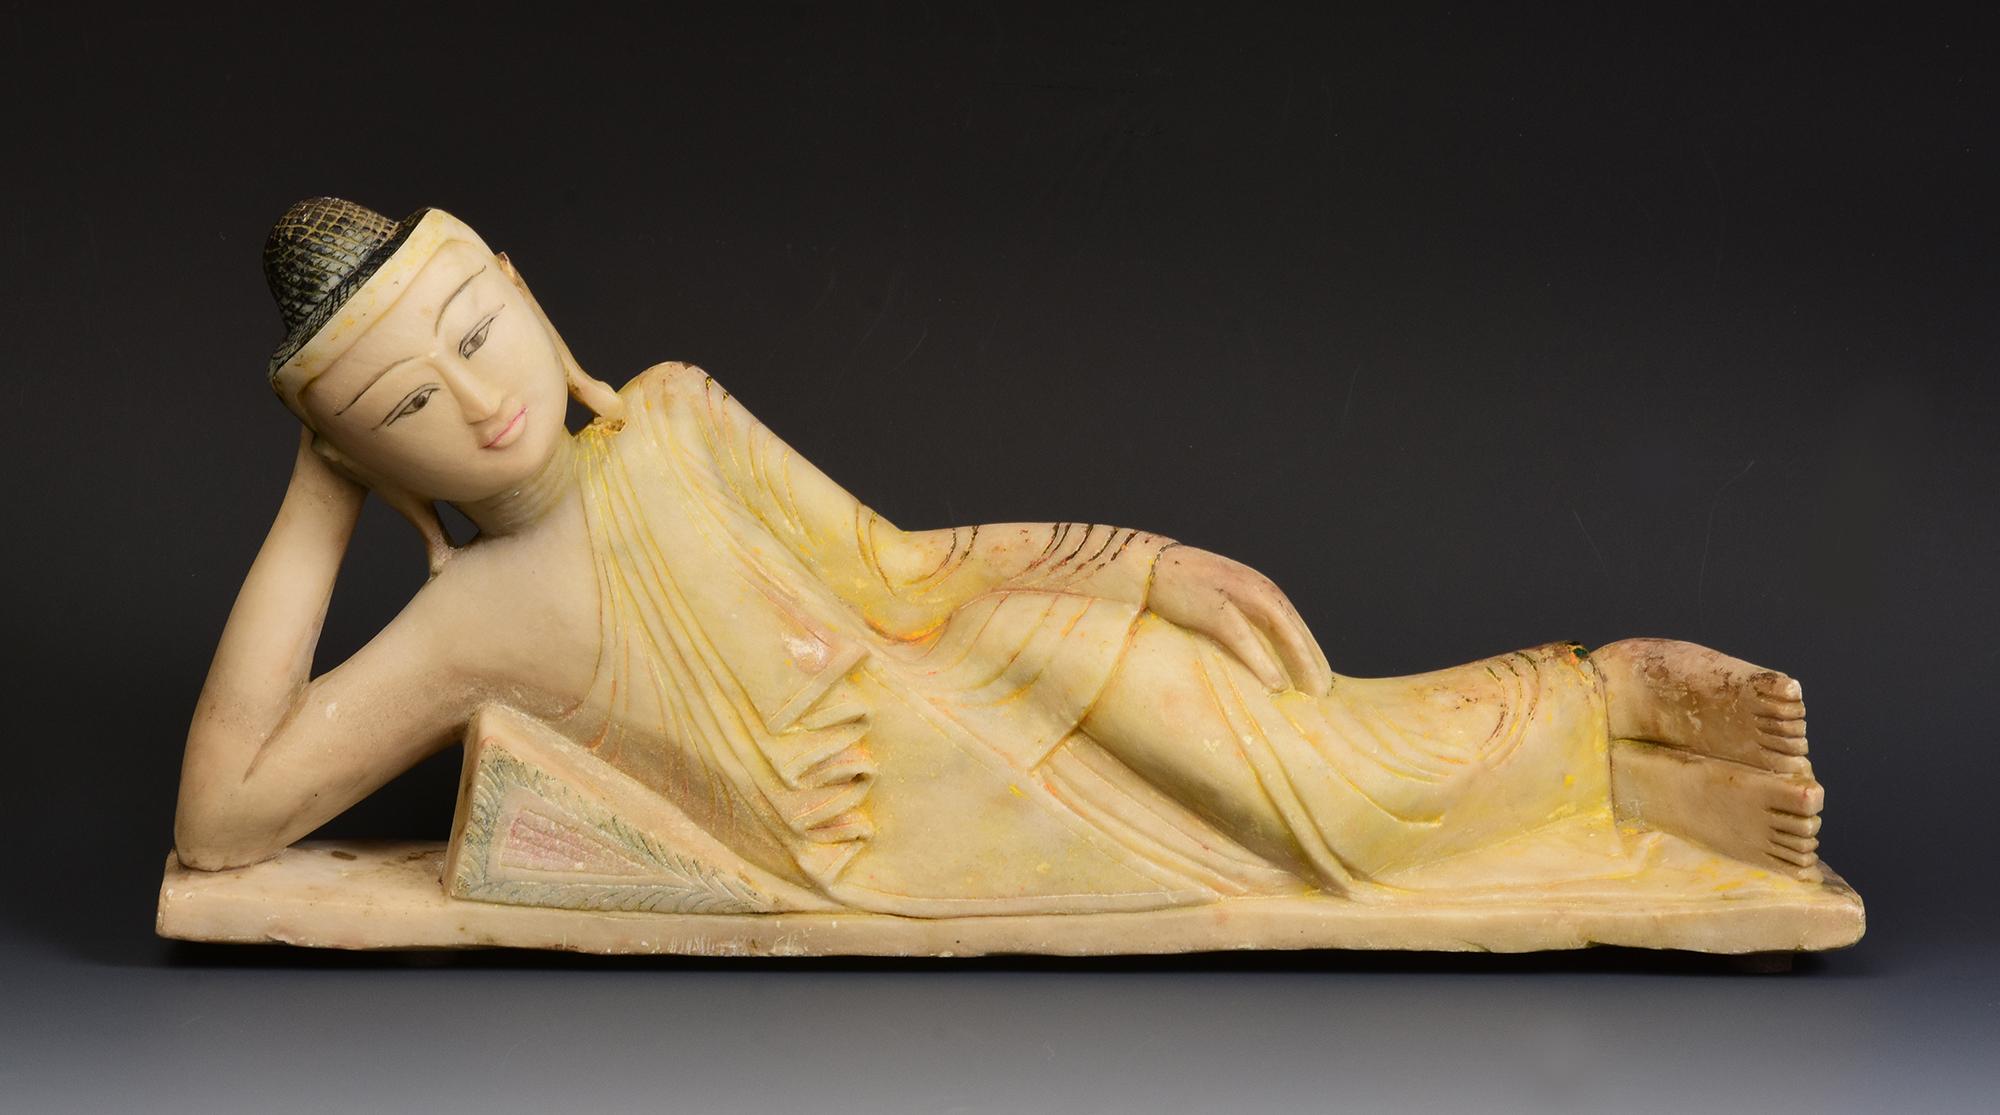 Antique Burmese soapstone reclining Buddha.

Age: Burma, Mandalay Period, 19th Century
Size: Length 43.3 C.M. / Width 6.8 C.M. / Height 19.3 C.M.
Condition: Nice condition overall (some expected degradation due to its age).

100% Satisfaction and